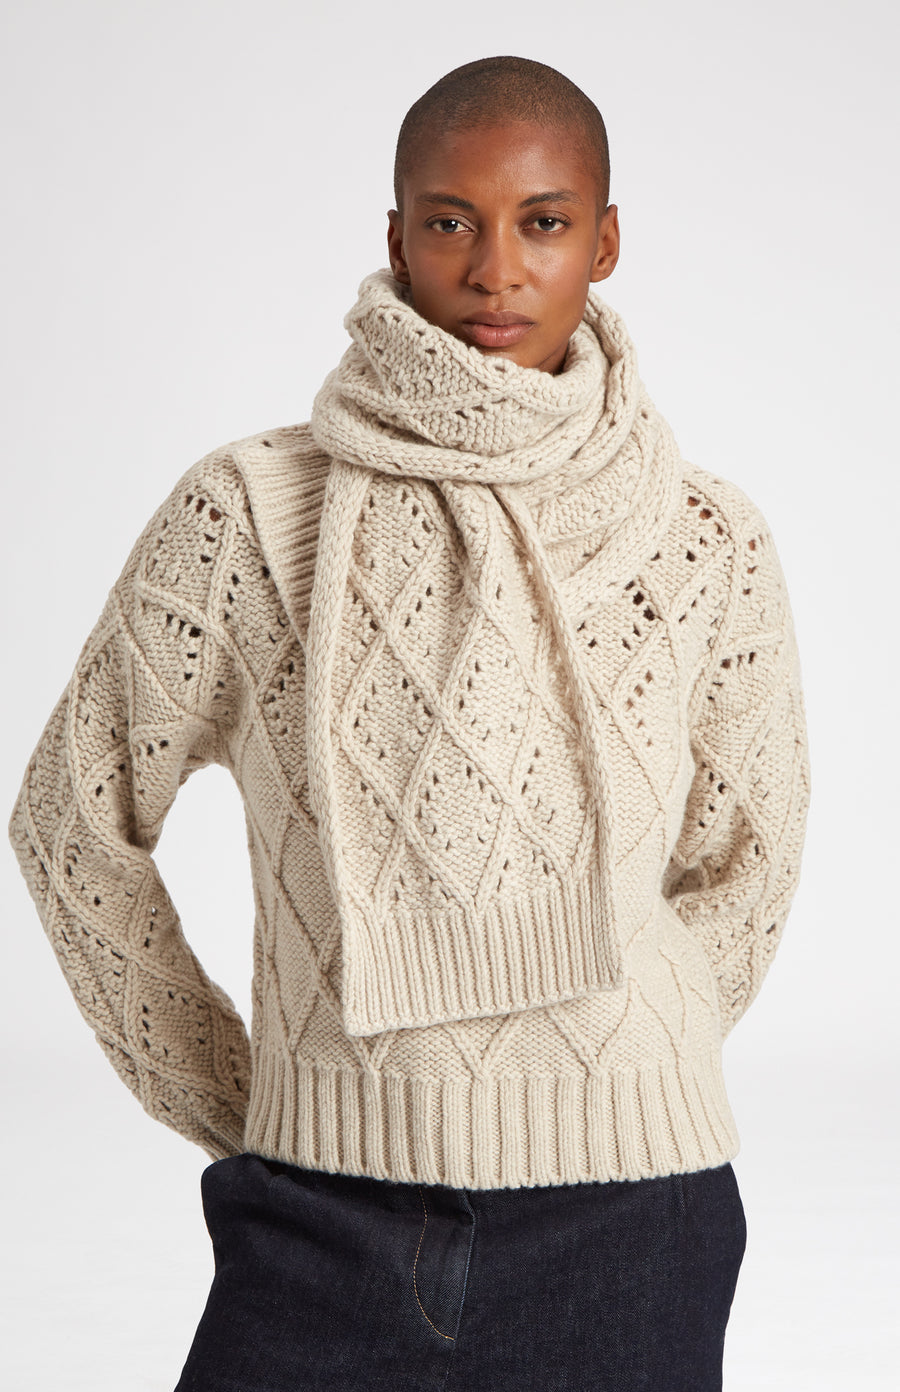 Allover Diamond Wool Scarf in Light Oatmeal on model with matching jumper - Pringle of Scotland